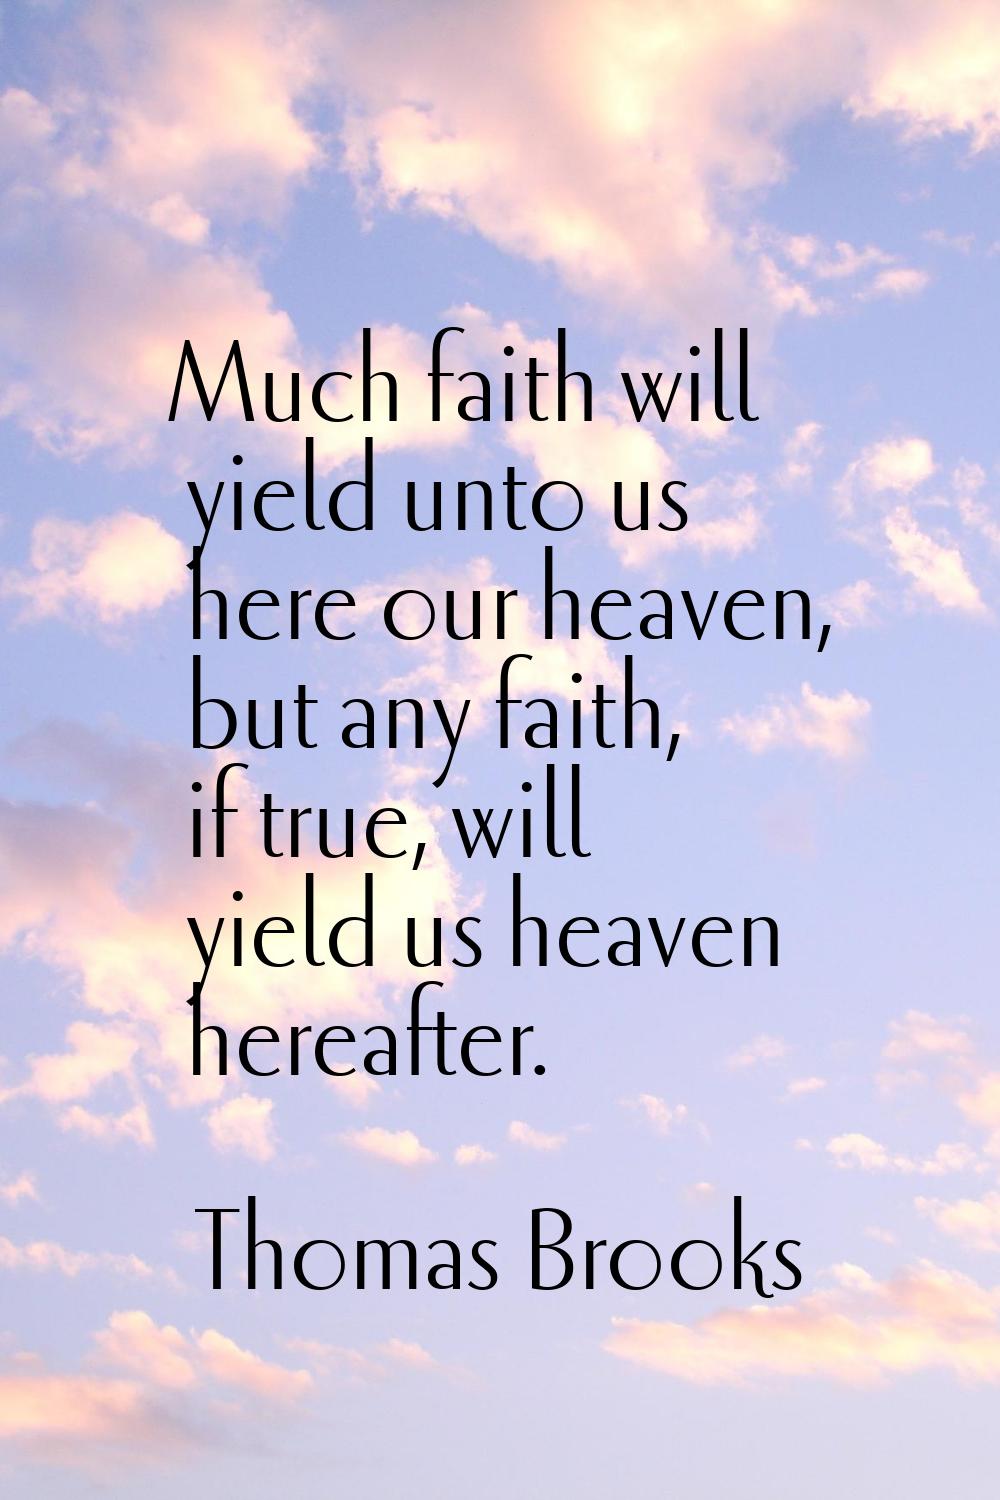 Much faith will yield unto us here our heaven, but any faith, if true, will yield us heaven hereaft